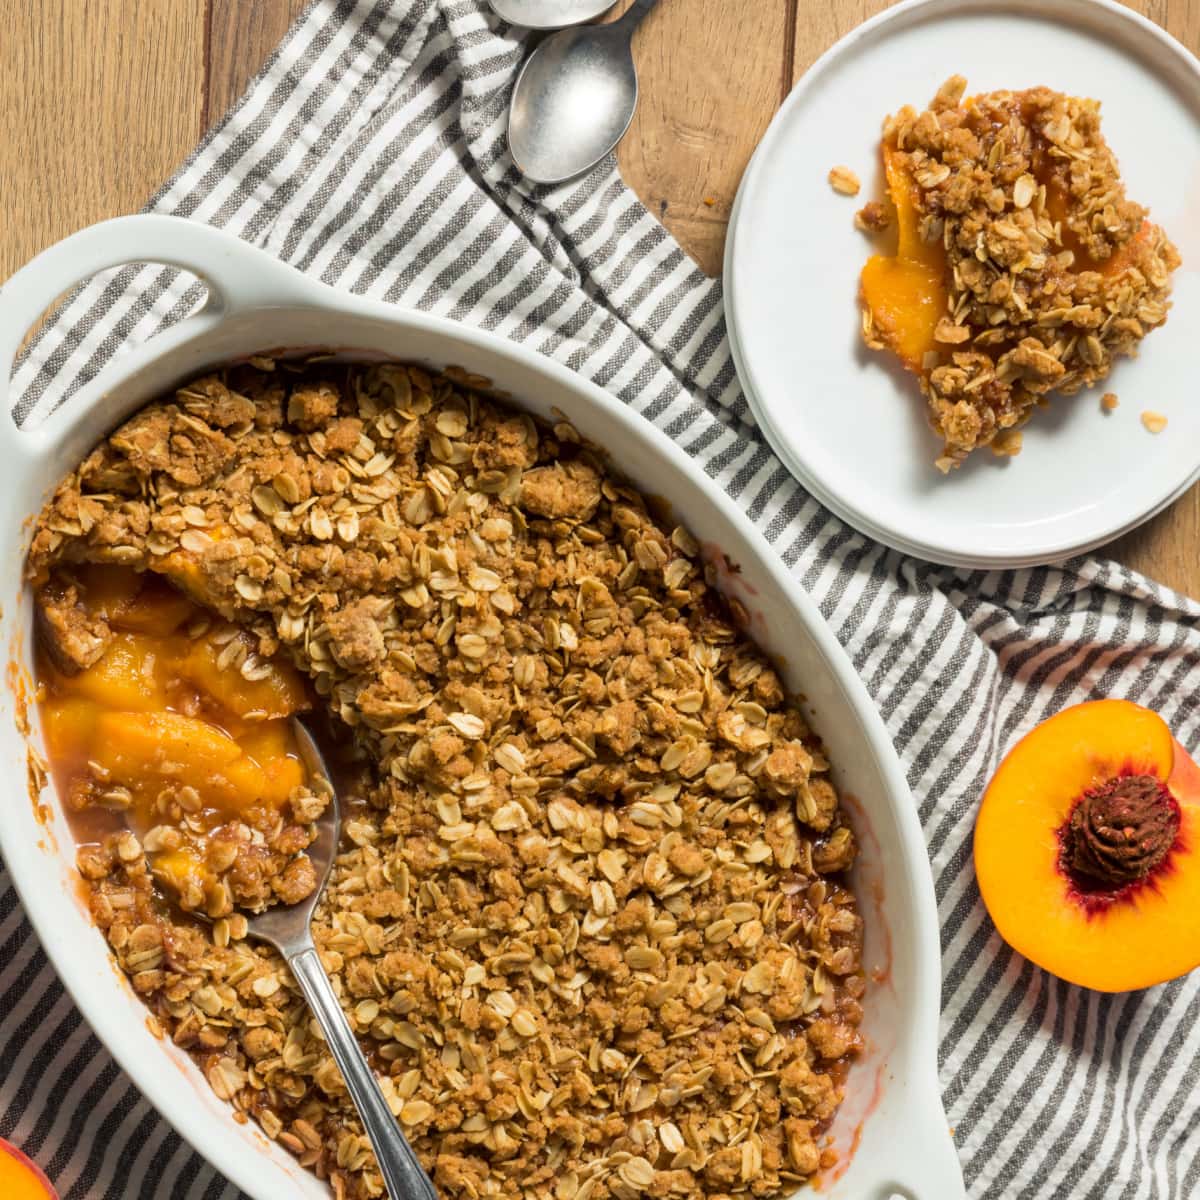 Peach crisp with a spoon, with golden-brown crust and juicy peach filling.